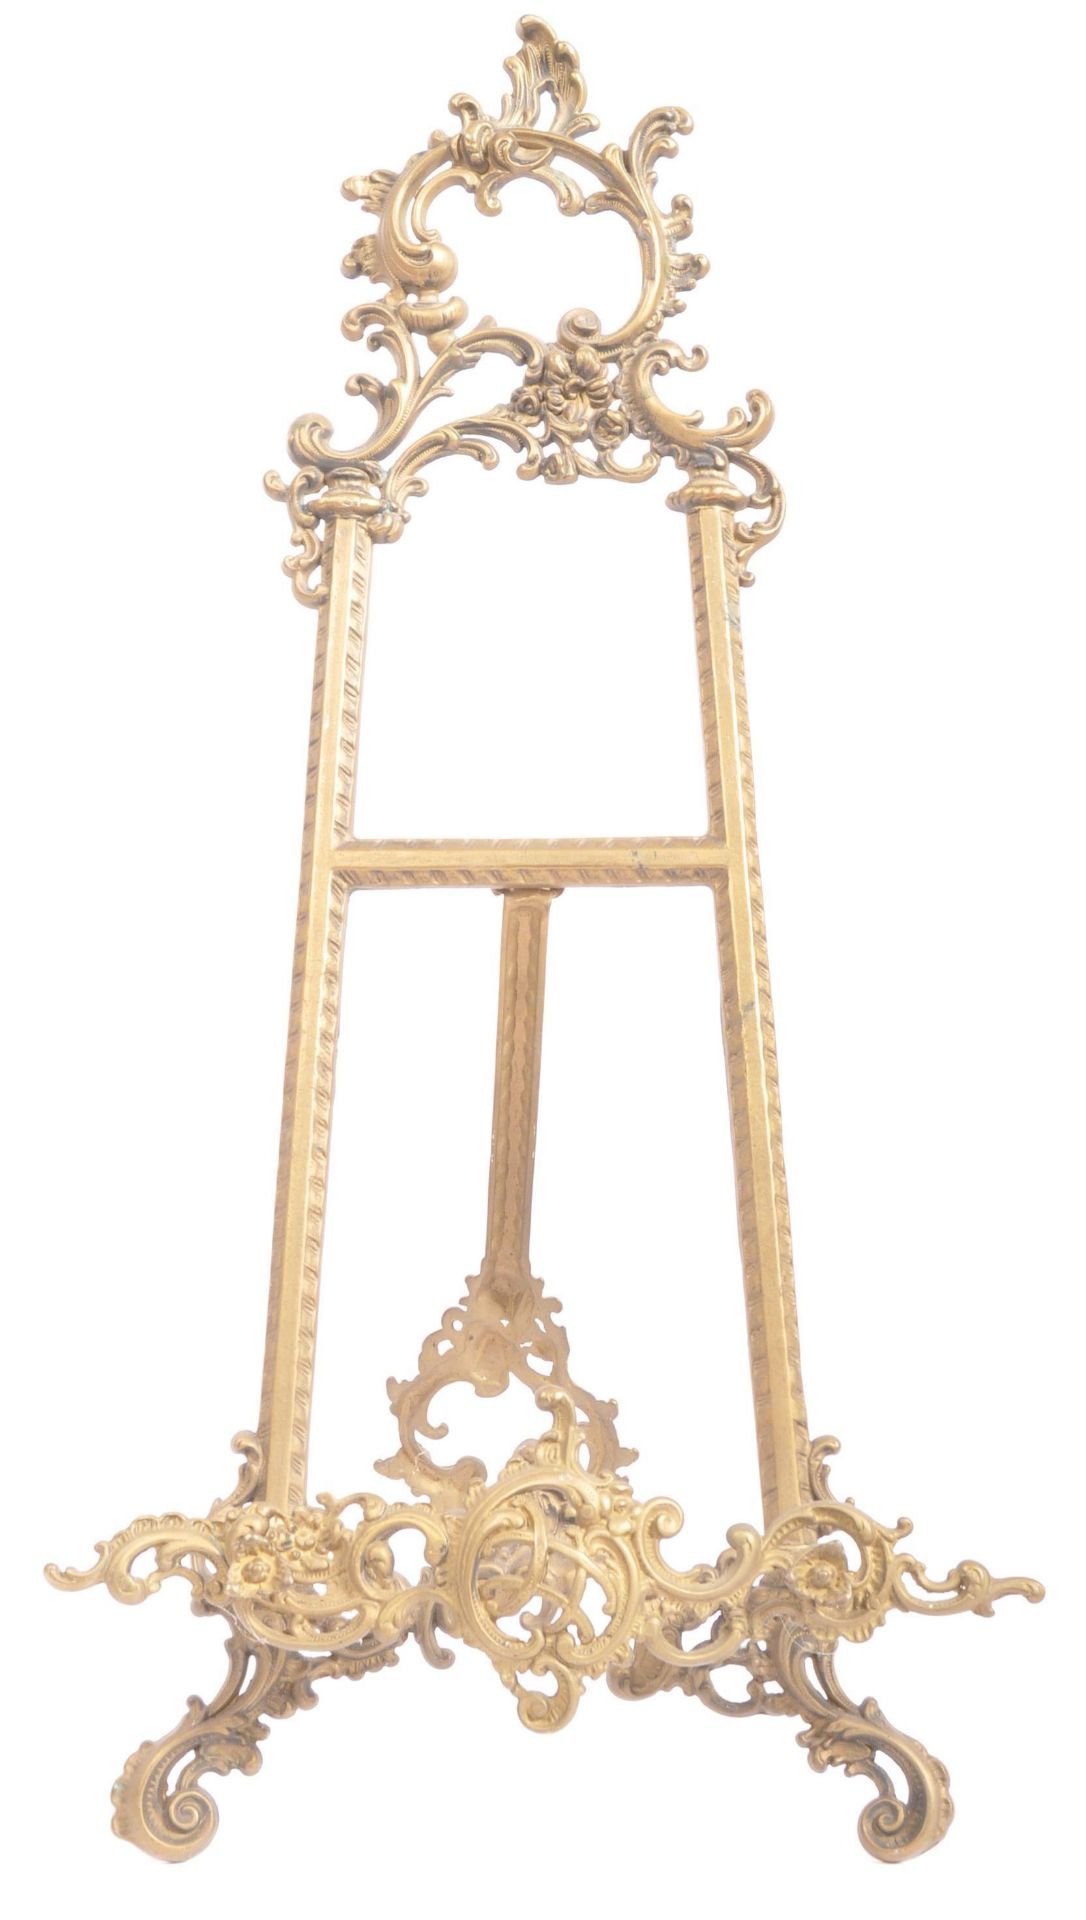 20TH CENTURY ART NOUVEAU GILT METAL PAINTING EASEL STAND - Image 2 of 5